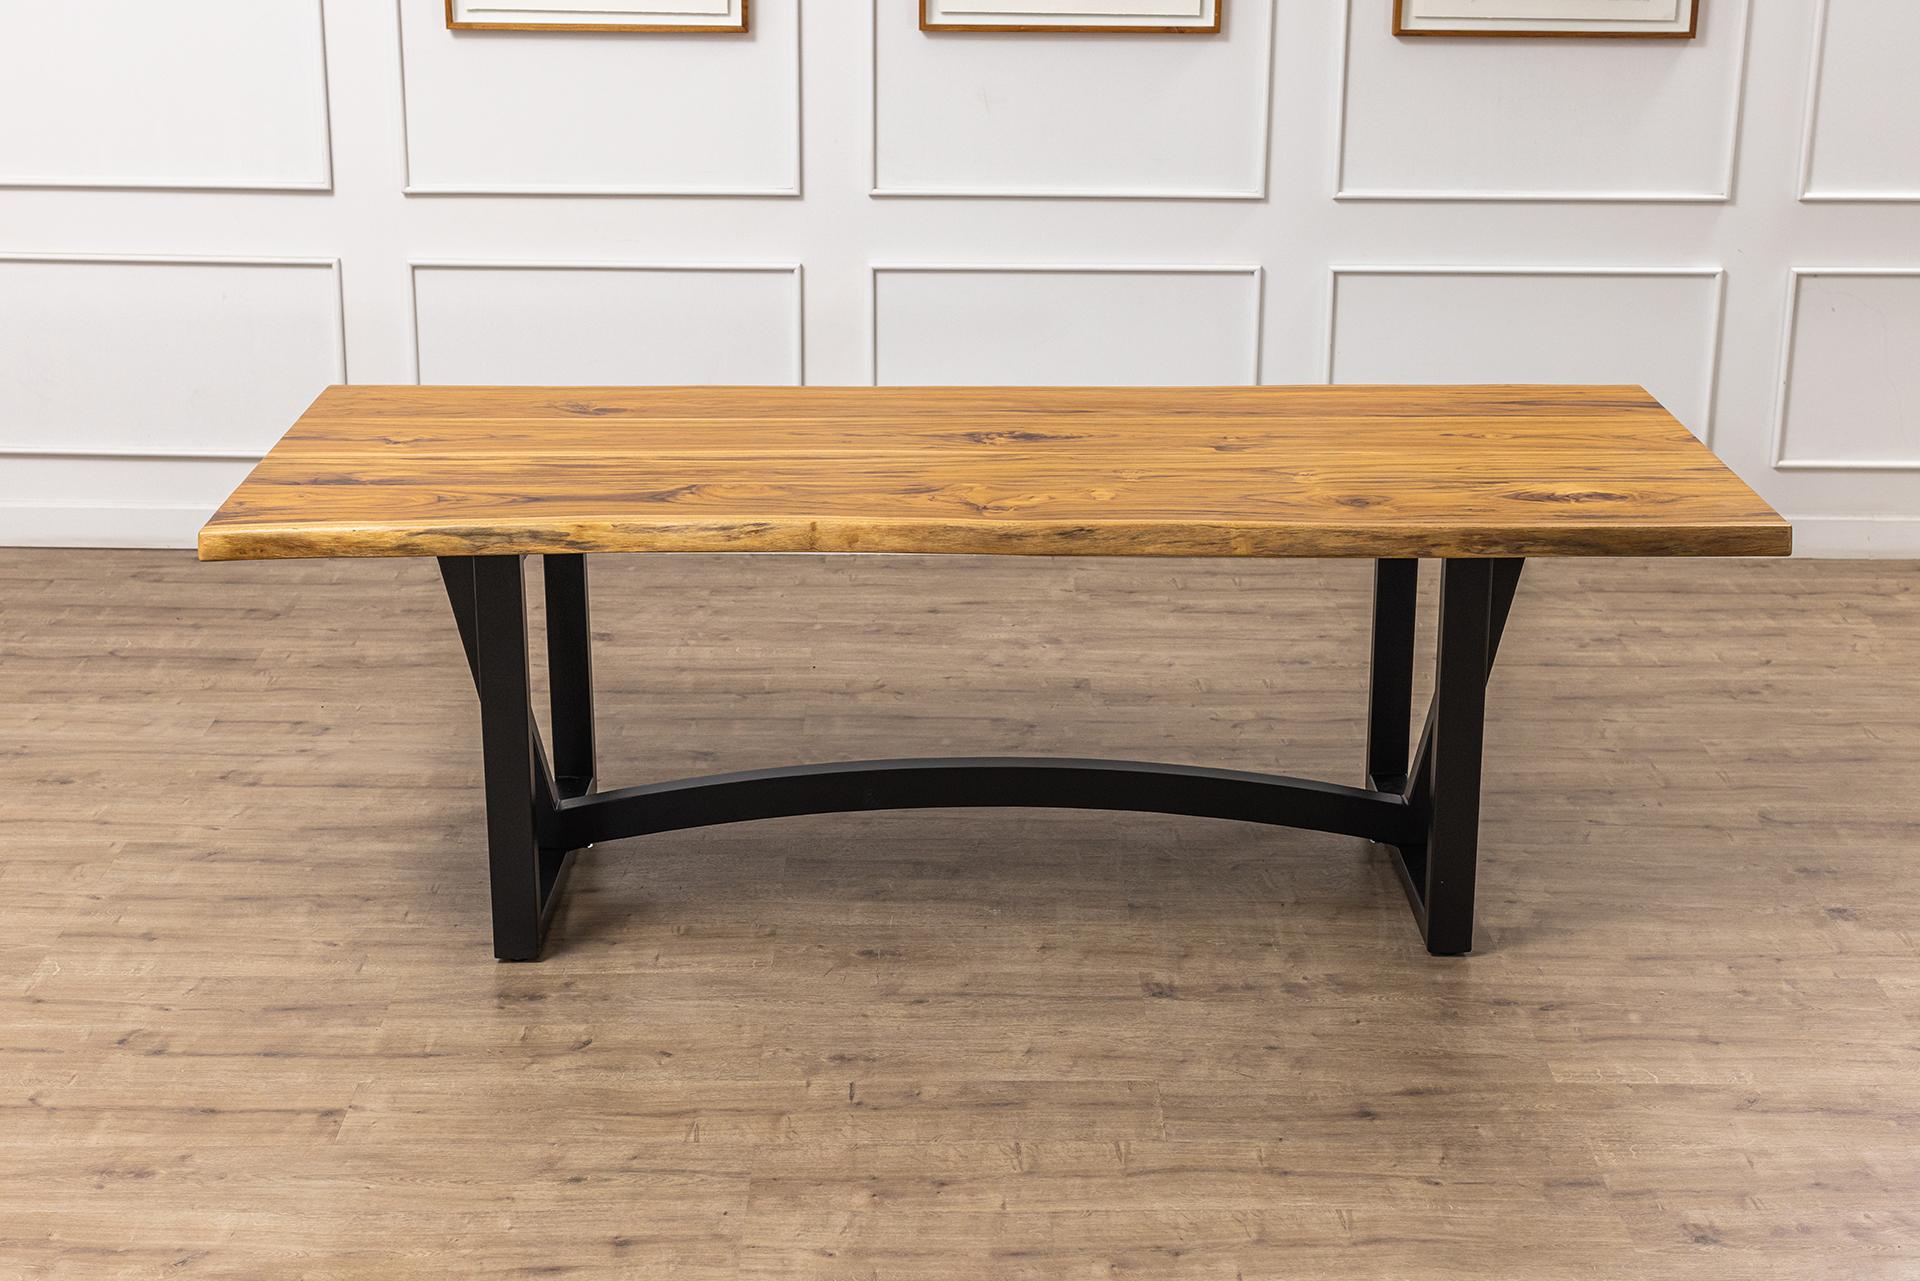 This gorgeous solid teak handcrafted table is built with 4 pieces of teak - 2 sets of book-matched planks. Expertly crafted with the care and quality you expect for the centerpiece of family memories, this table features a beautiful smooth natural